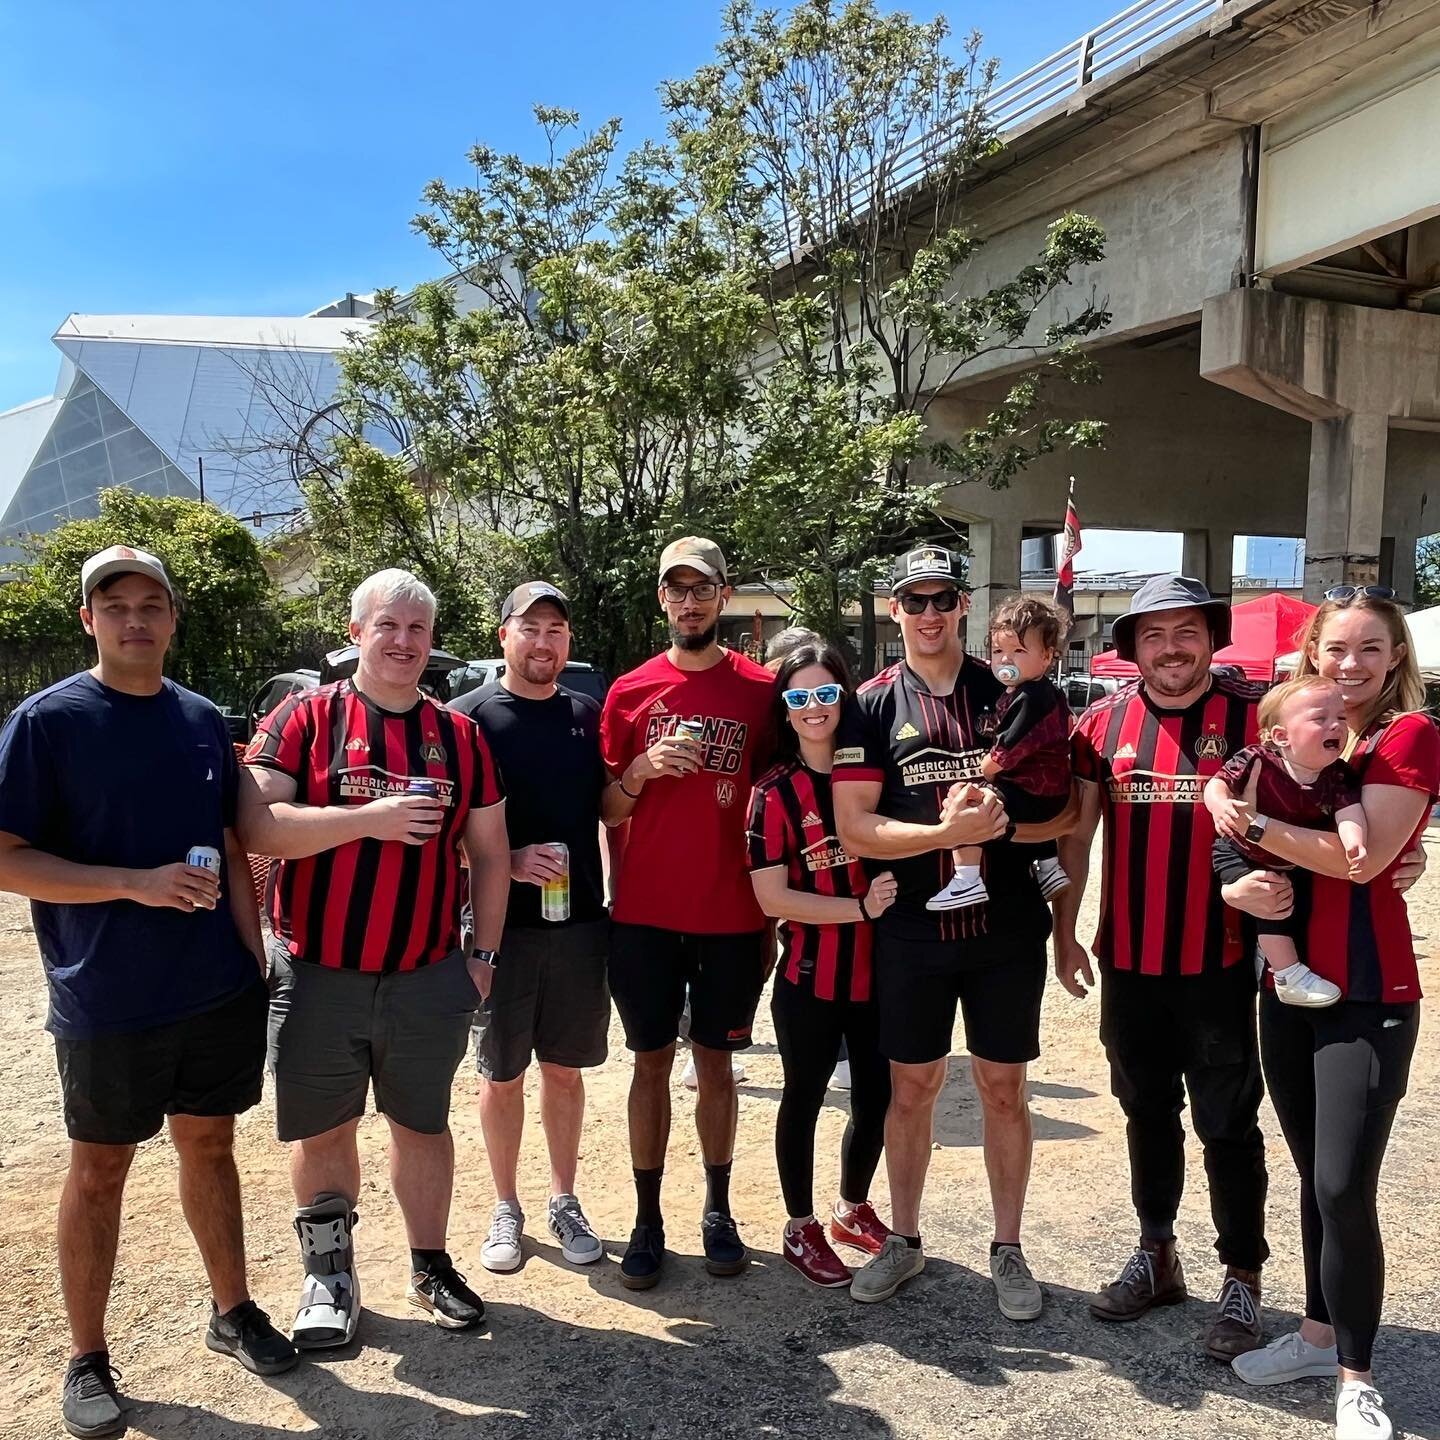 Kookas tailgate for today&rsquo;s Atlanta United matchup